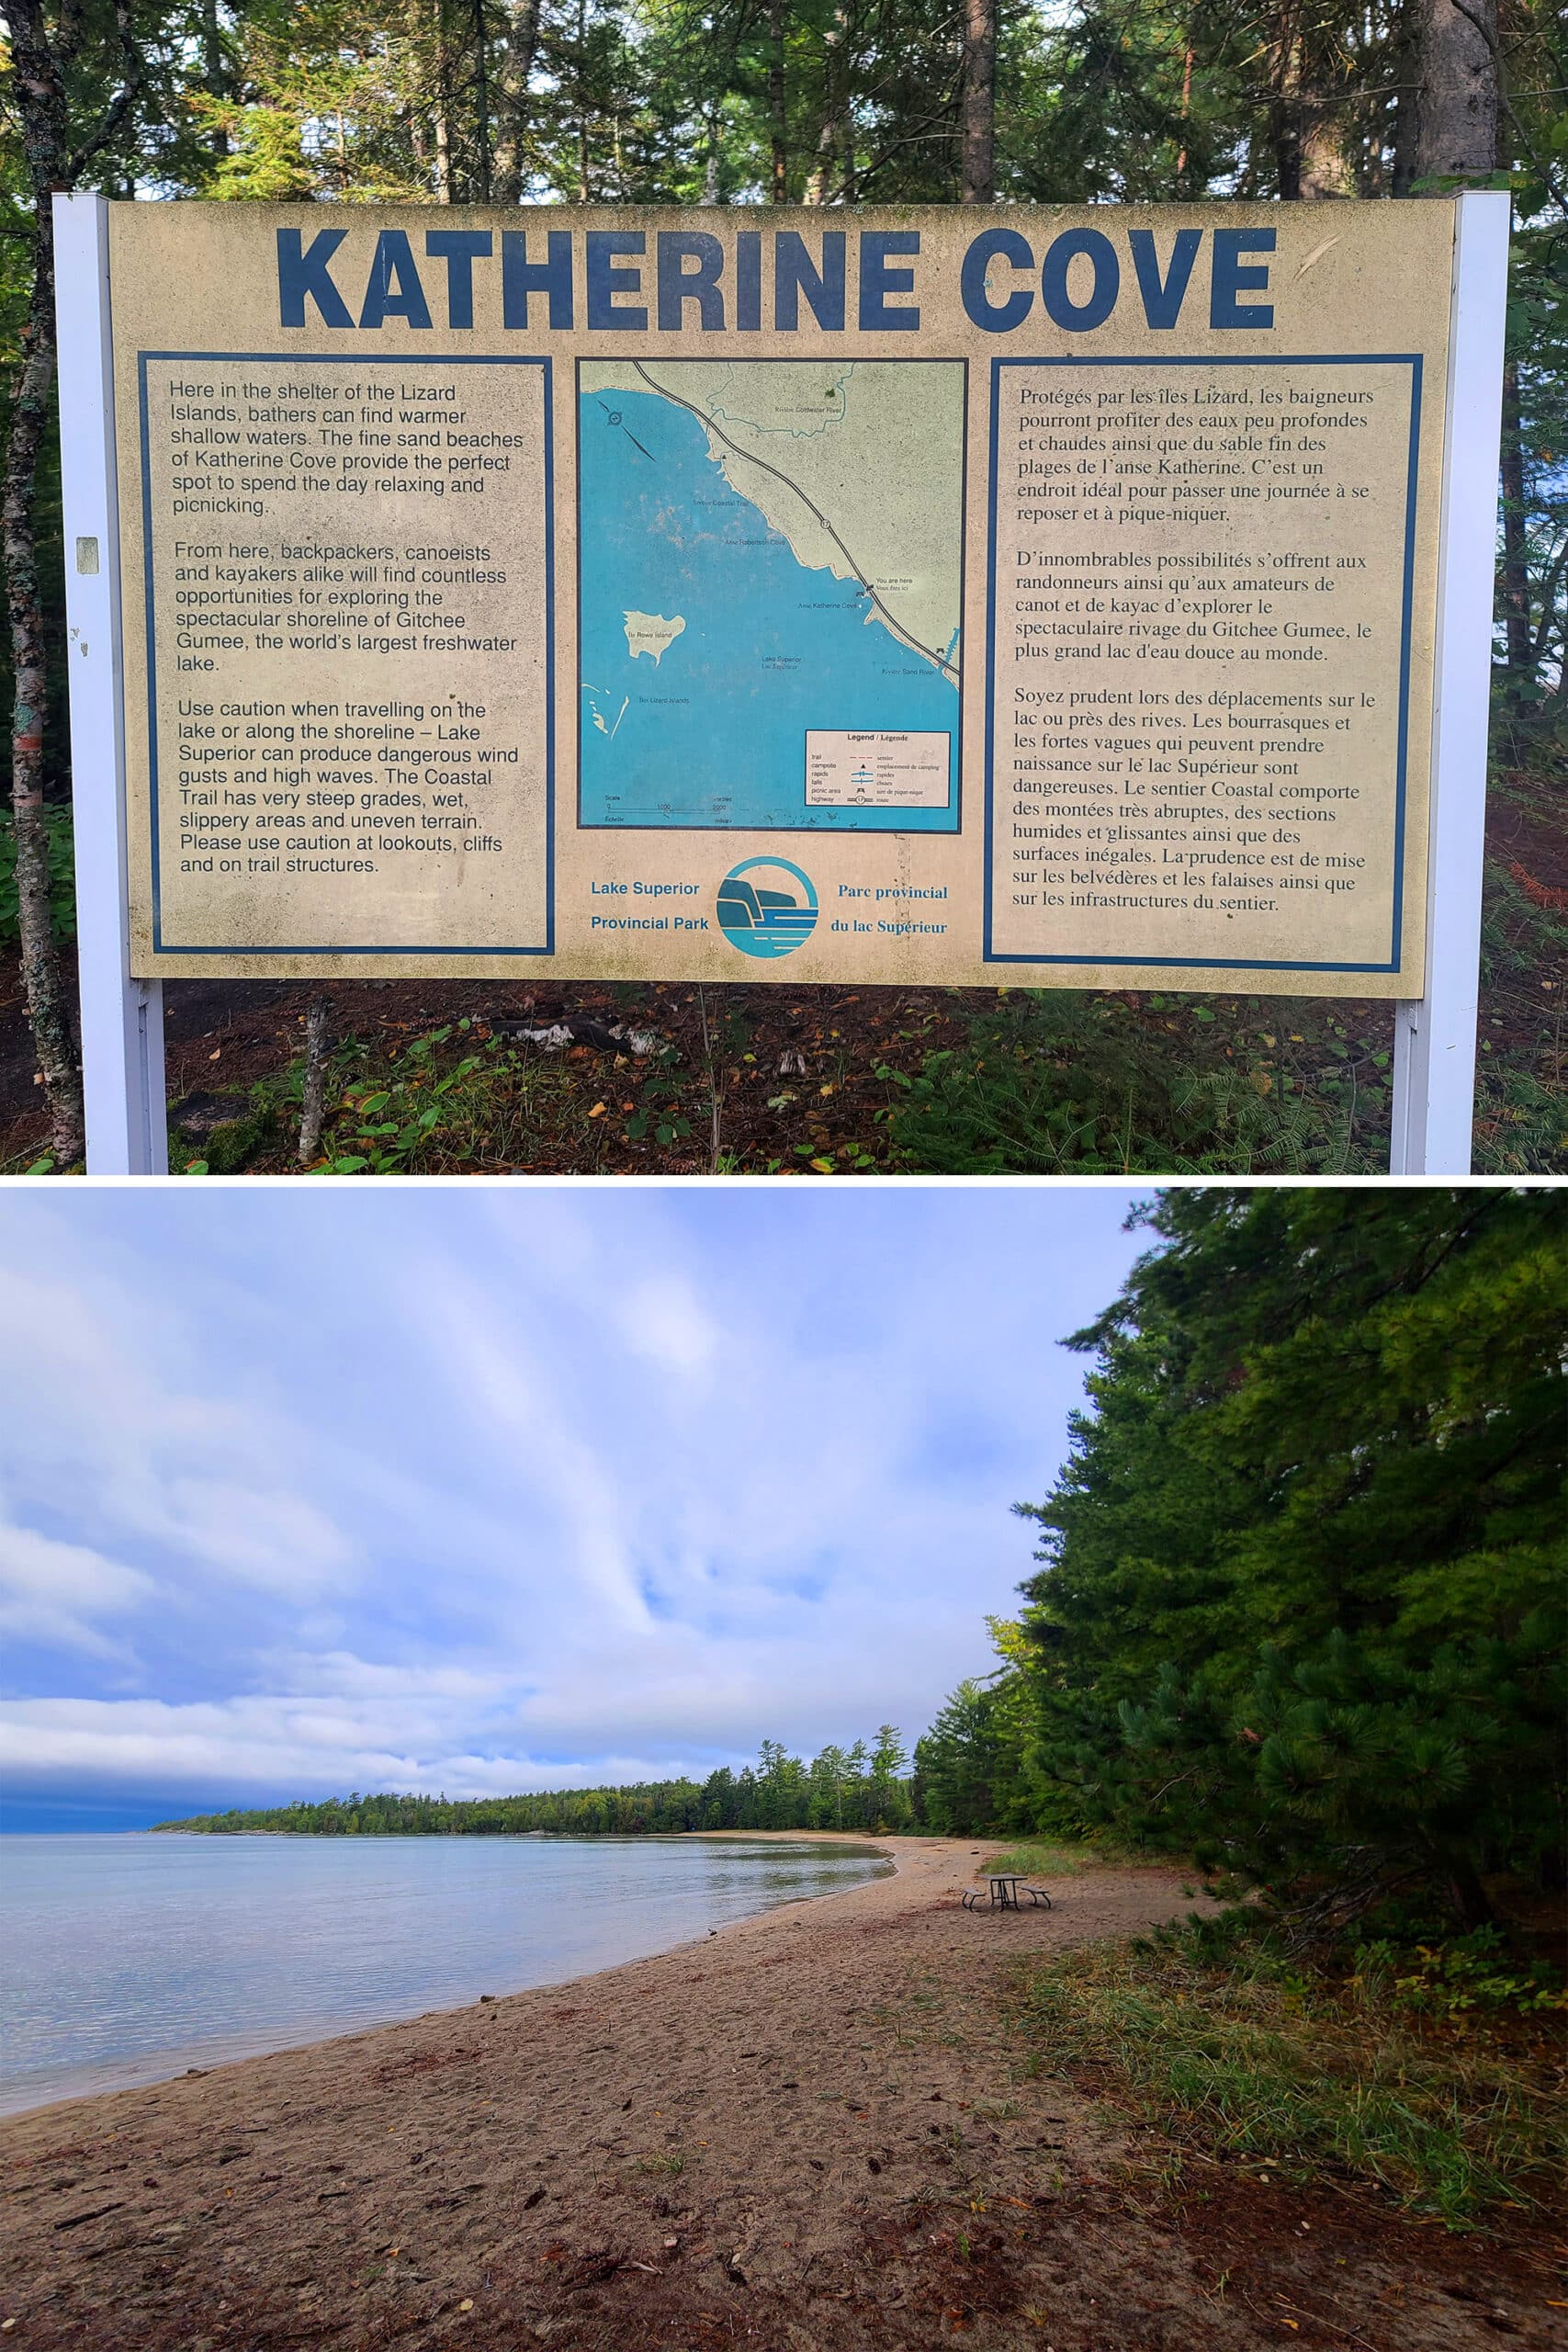 A 2 part image showing a park sign talking about this history of the area, and a large bay with a beach.